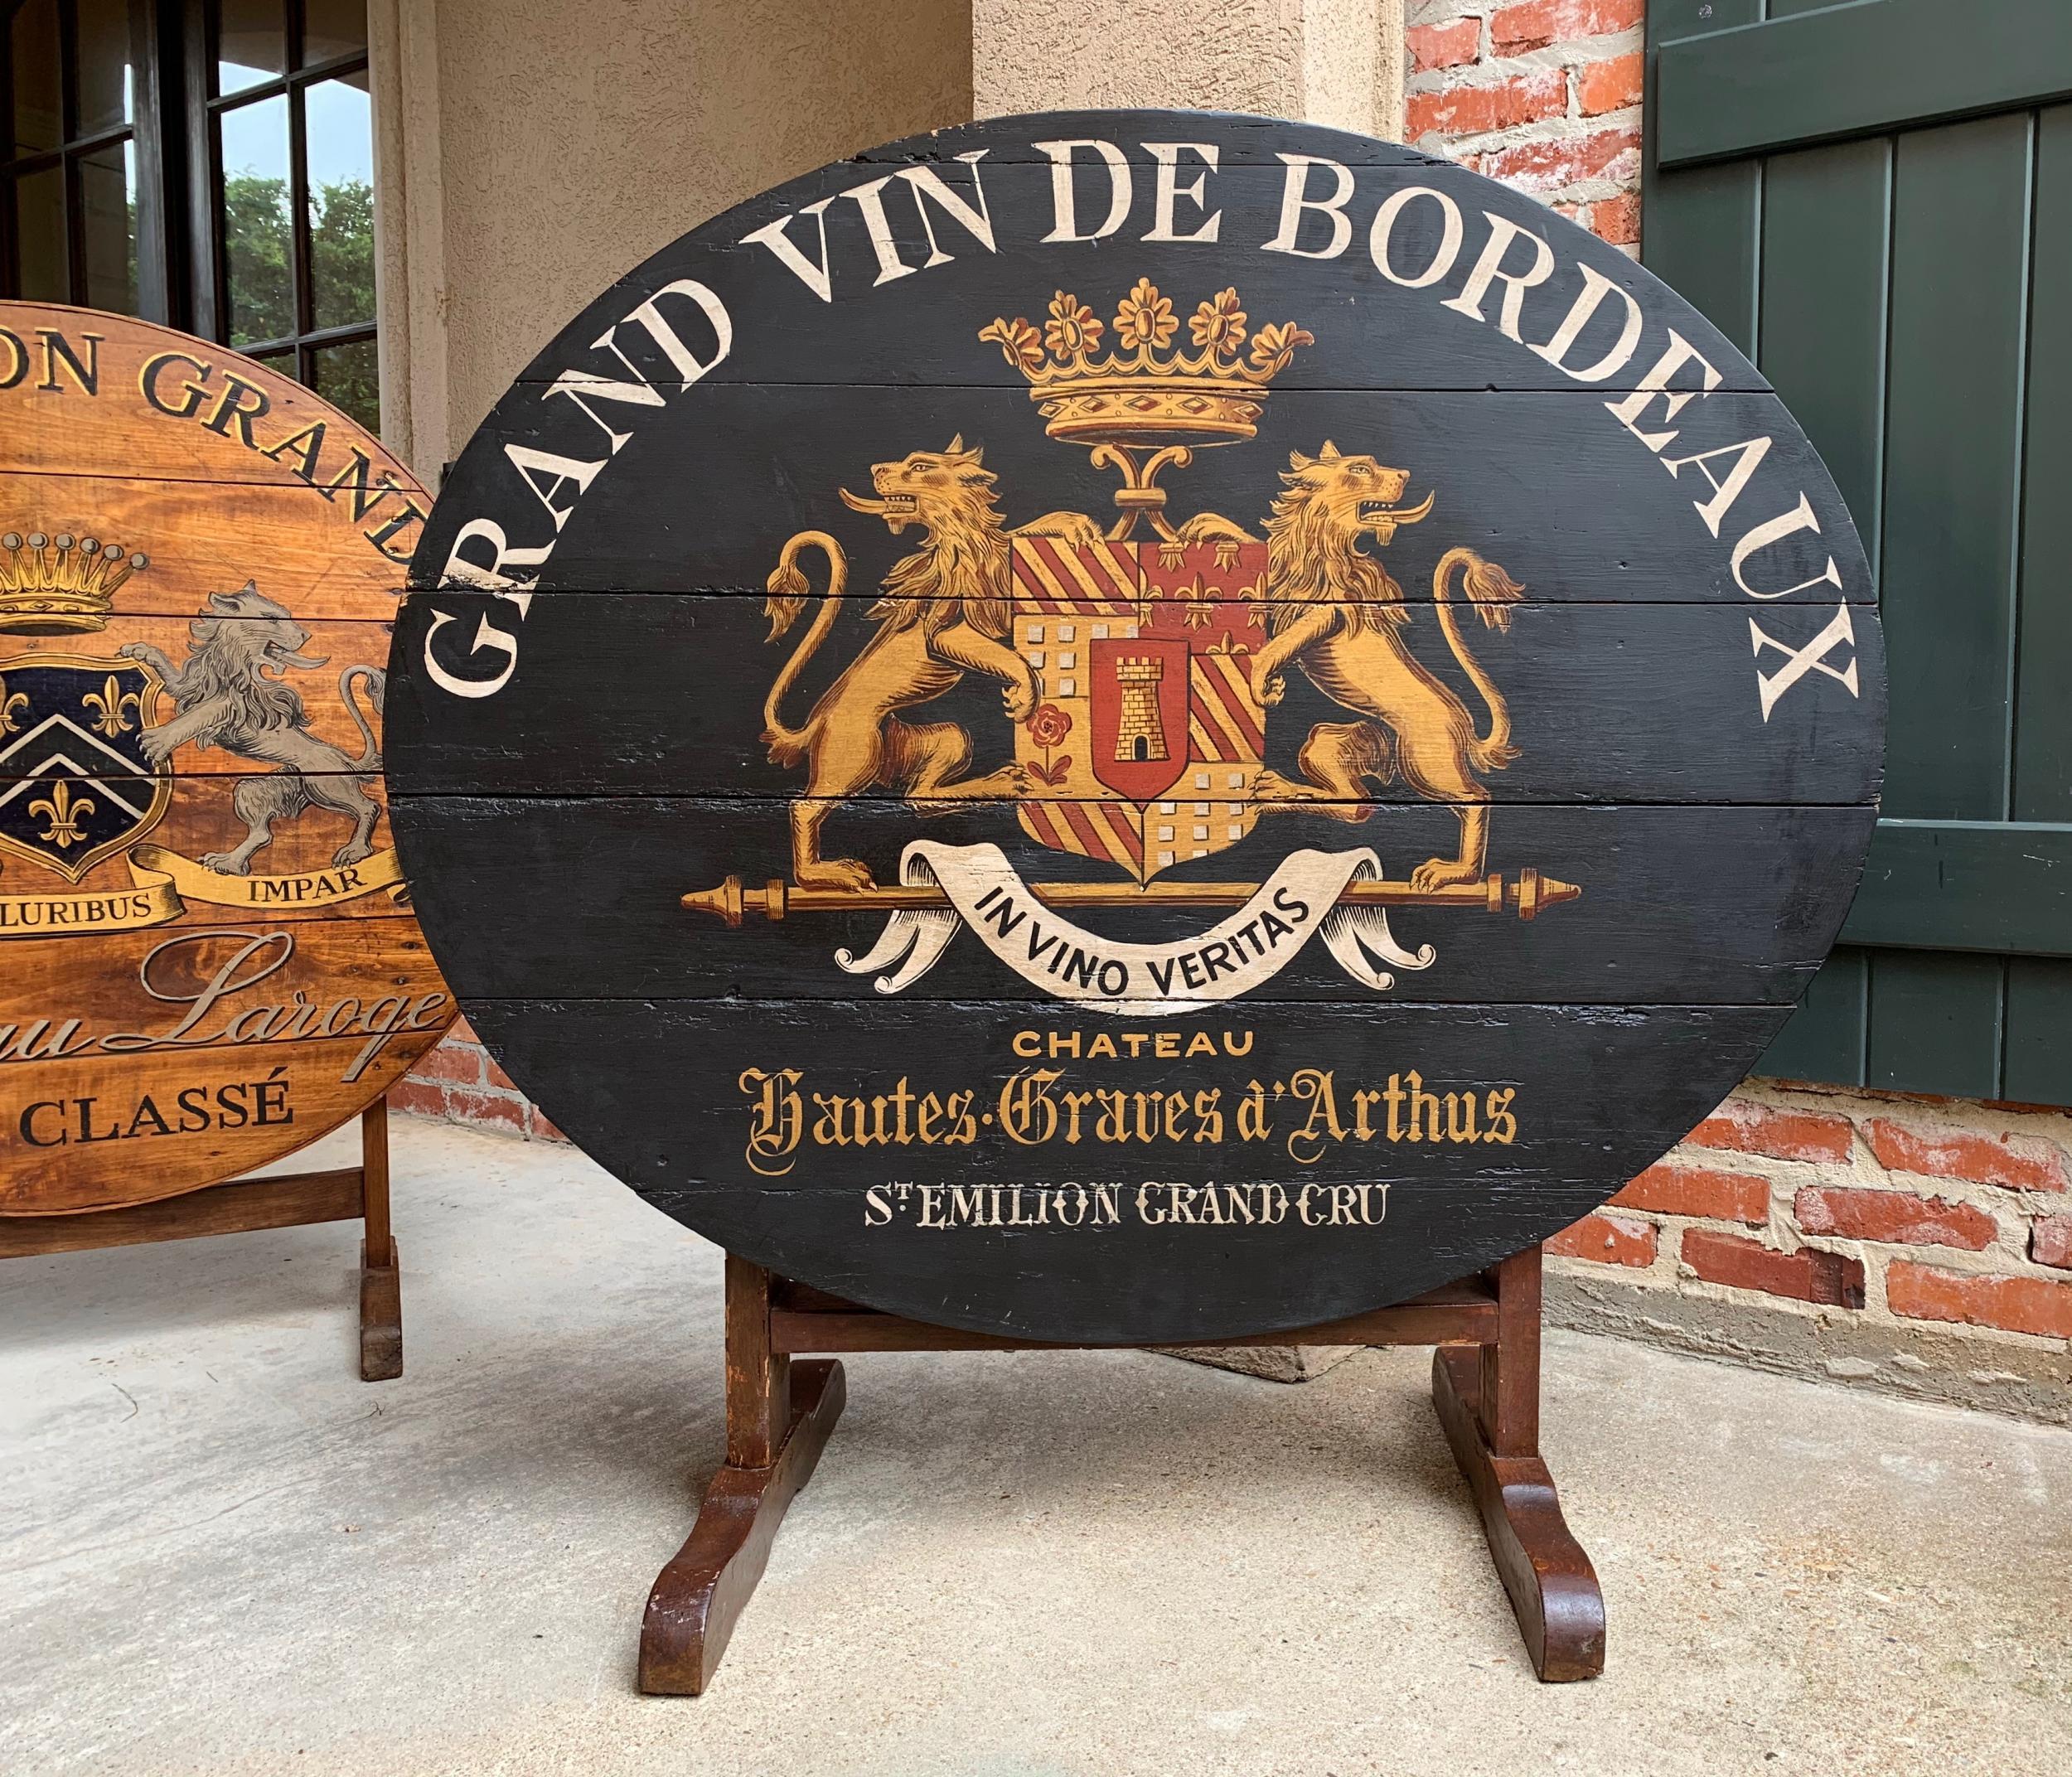 ~Direct from France~
~This large antique French tilt-top ‘wine tasting’ table, or 
“table de vigneron” is also a piece of art, with it’s amazing hand painted front!~
~ Popular in the wine growing regions of France, this kind of table was used in